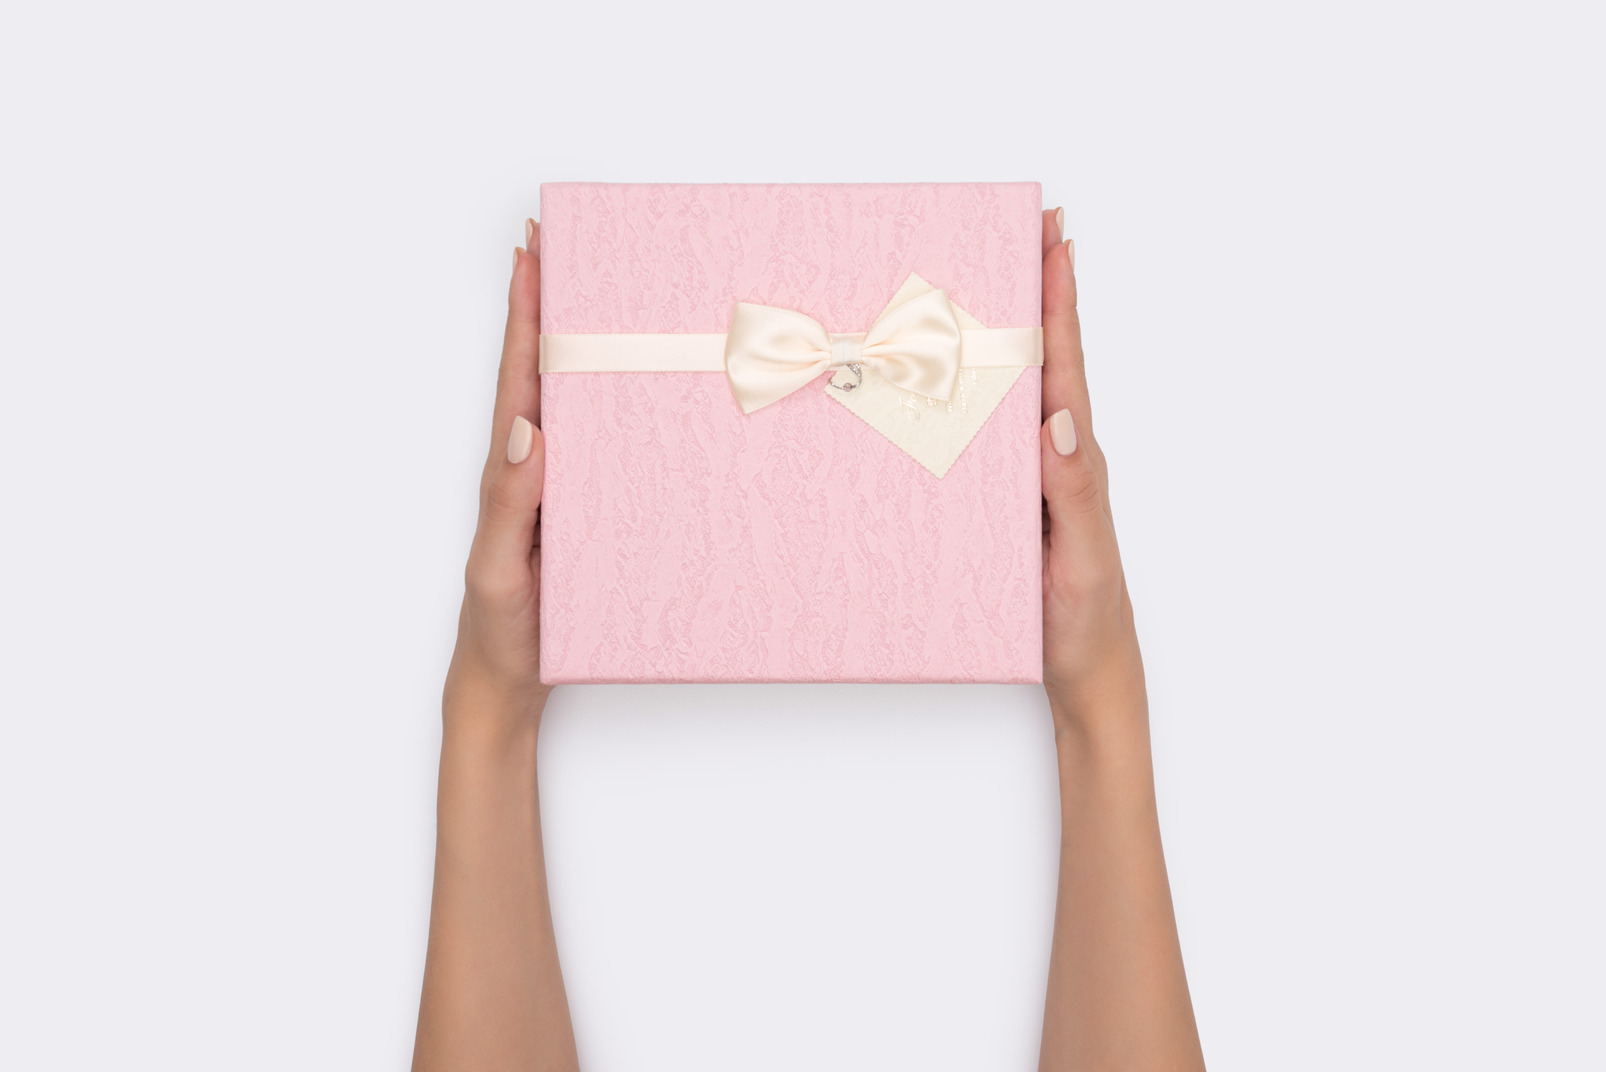 Female hands holding pink gift box